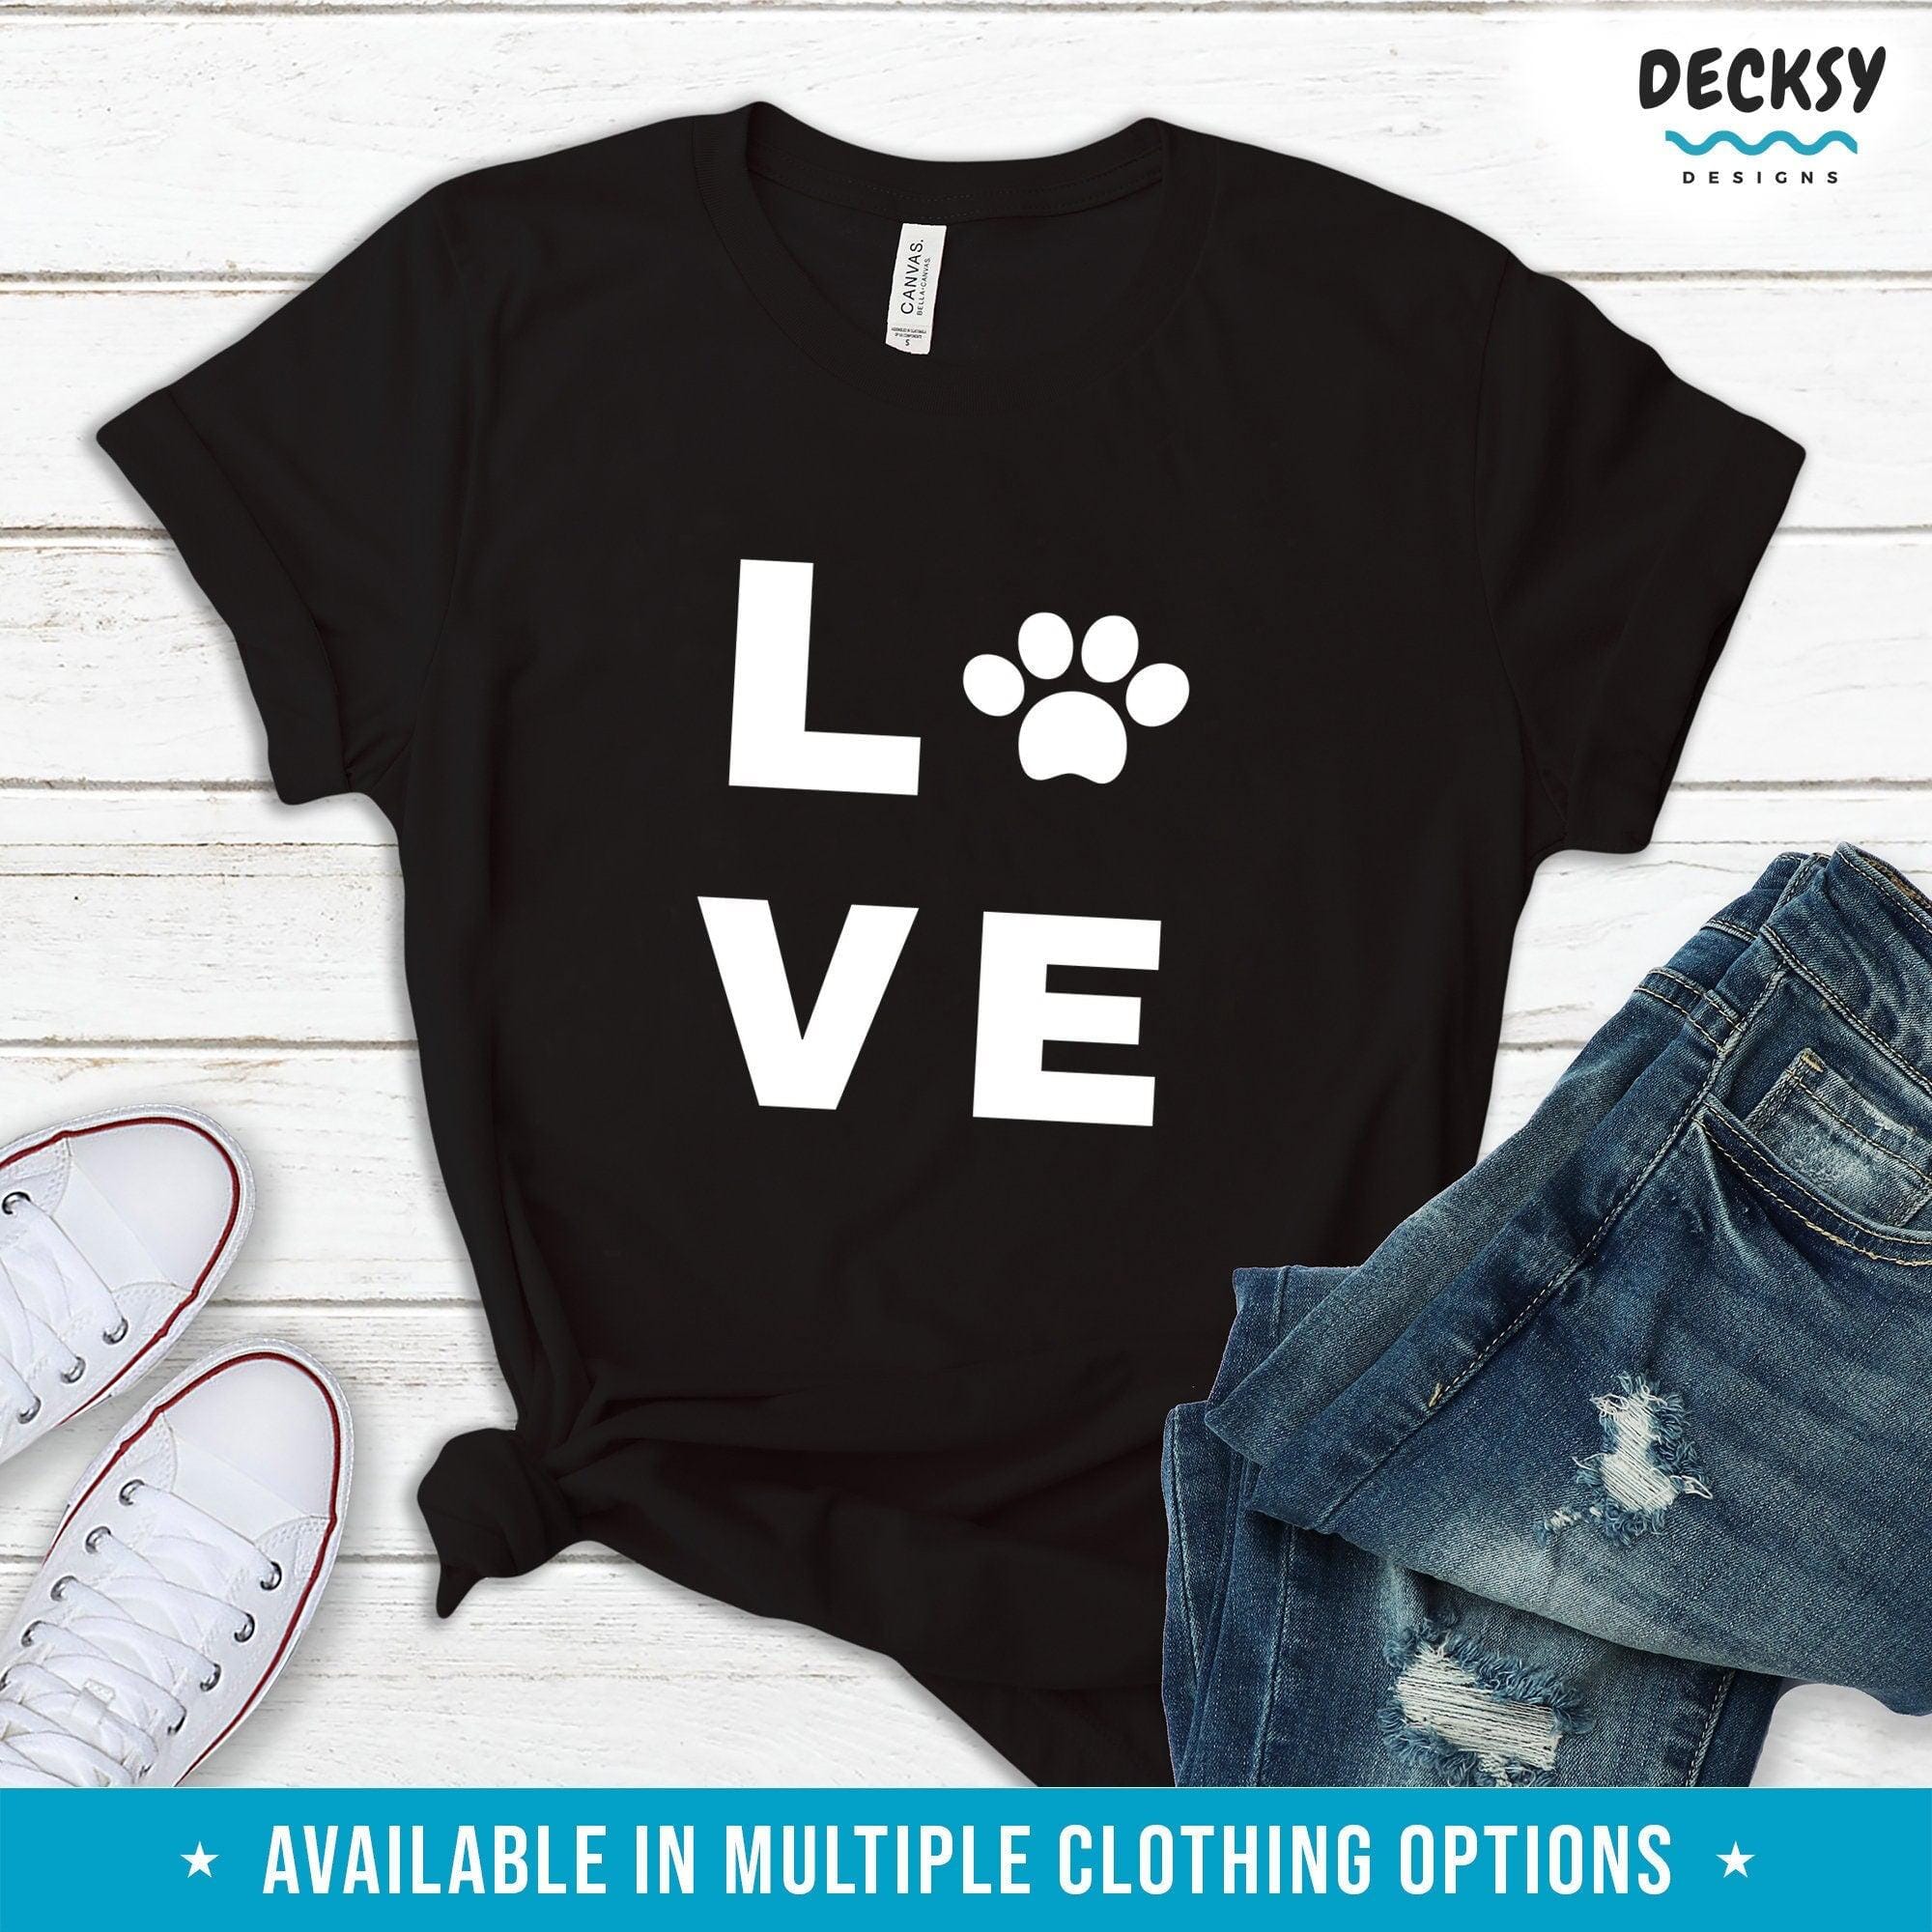 Dog Lover Shirt, Gift For Pet Parents-Clothing:Gender-Neutral Adult Clothing:Tops & Tees:T-shirts:Graphic Tees-DecksyDesigns